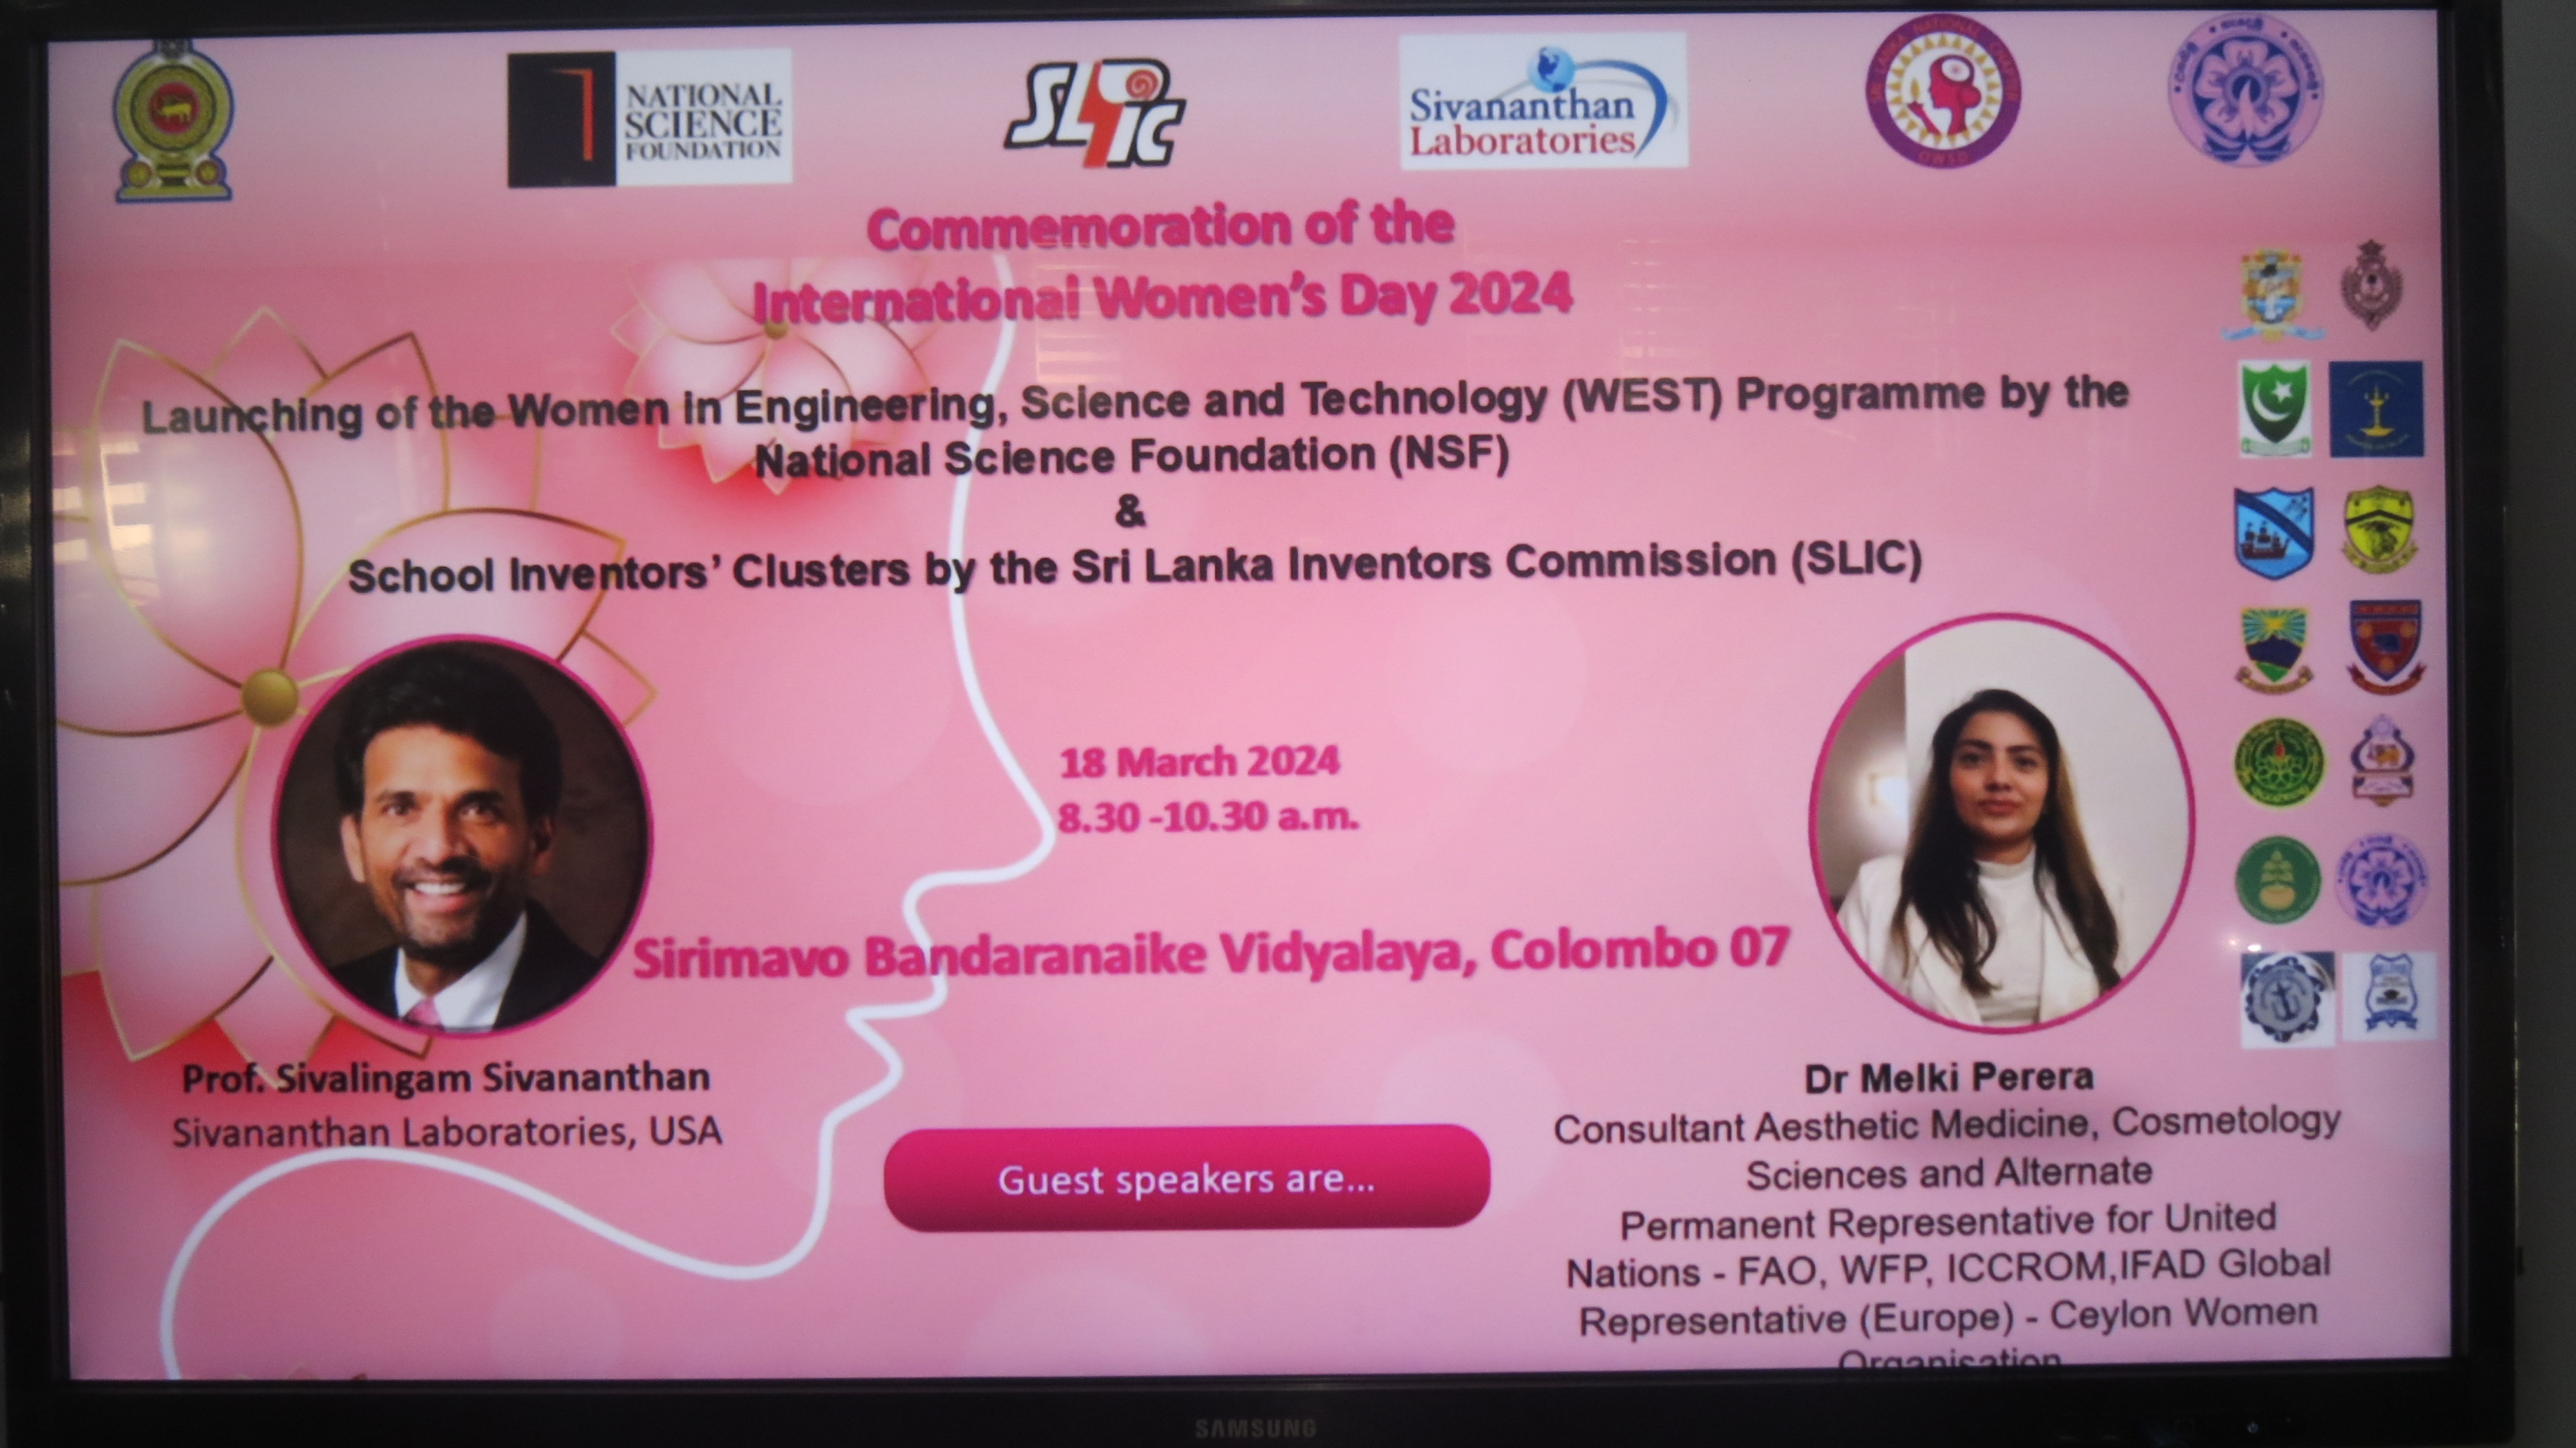 NSF launches the WEST Programme in commemorating the International Women’s Day 2024